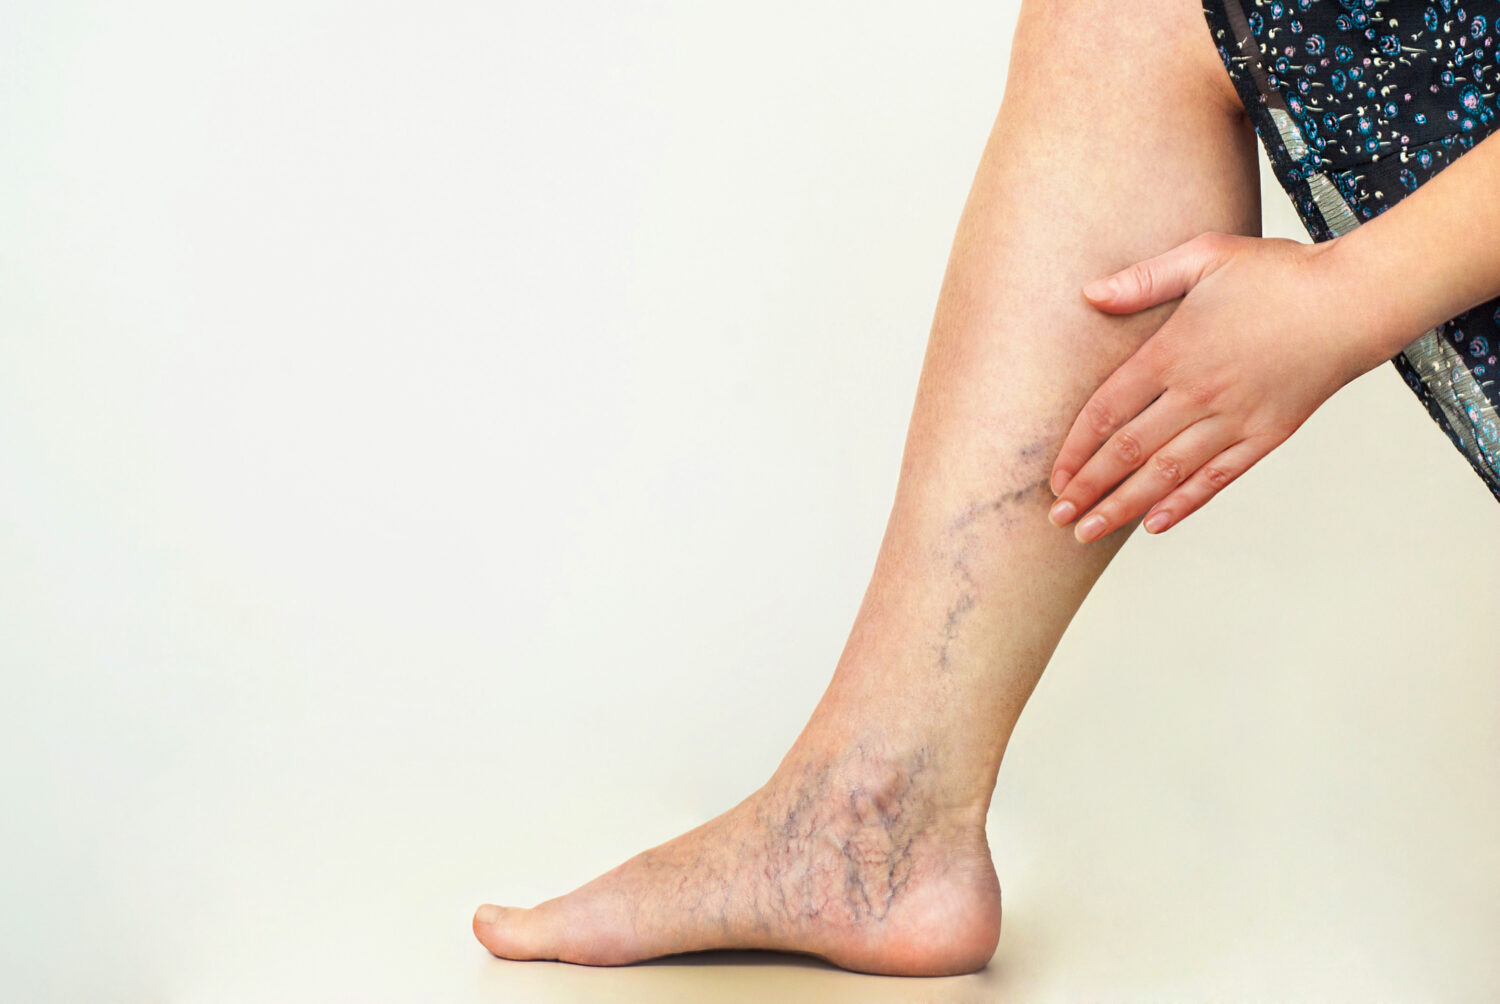 Laser Therapy: Is It the Best Treatment for Varicose Veins?